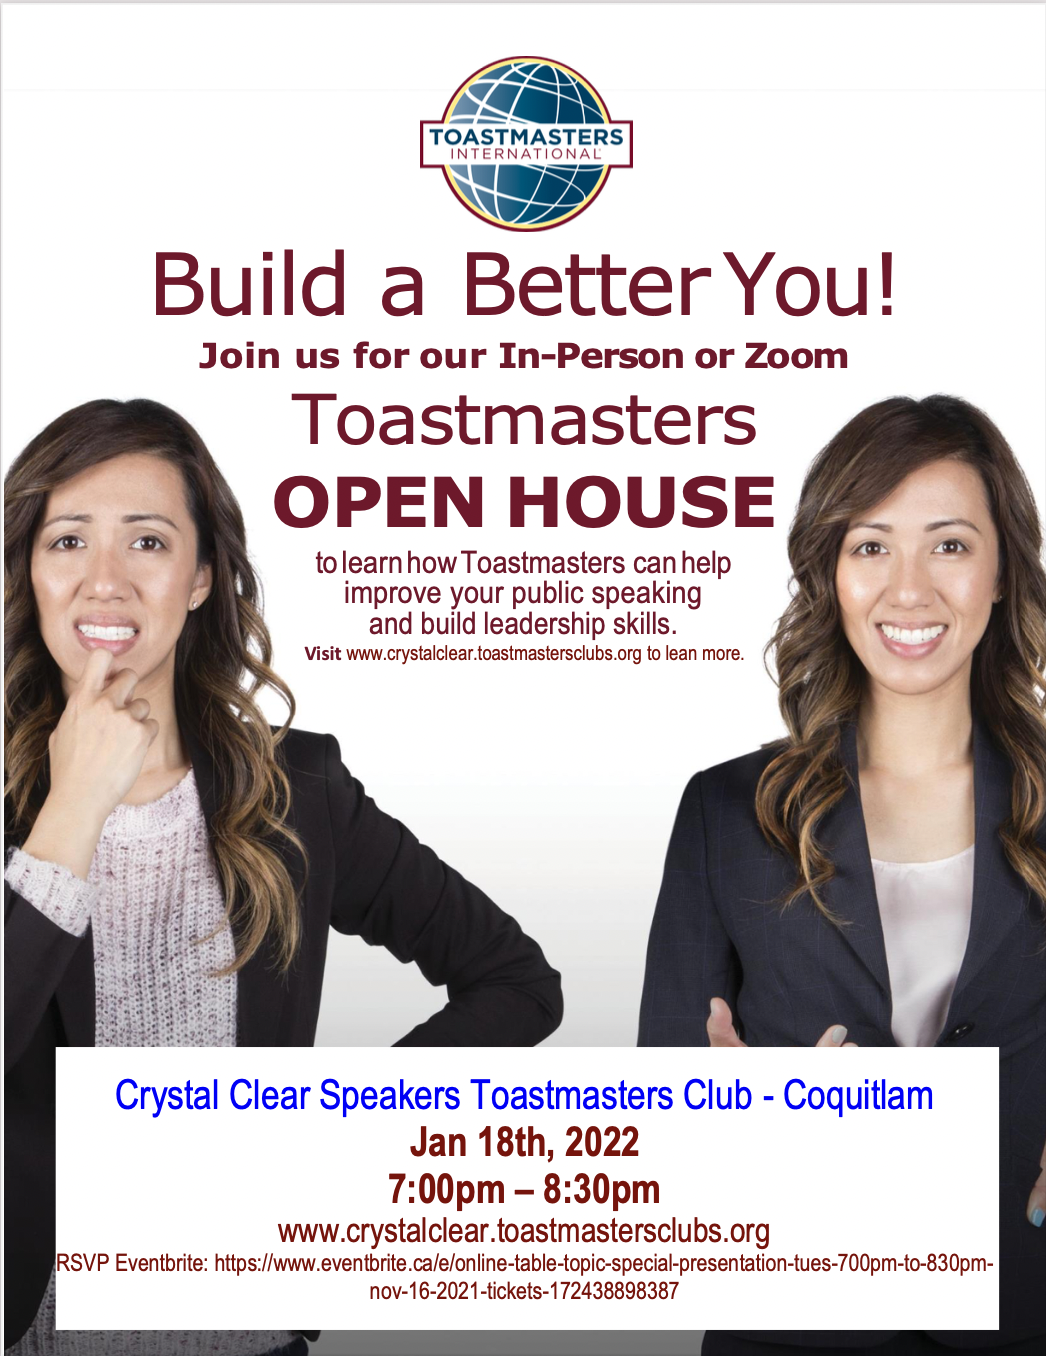 Crystal Clear Speakrs Toastmasters Club Open House Jan. 18th, 2022 